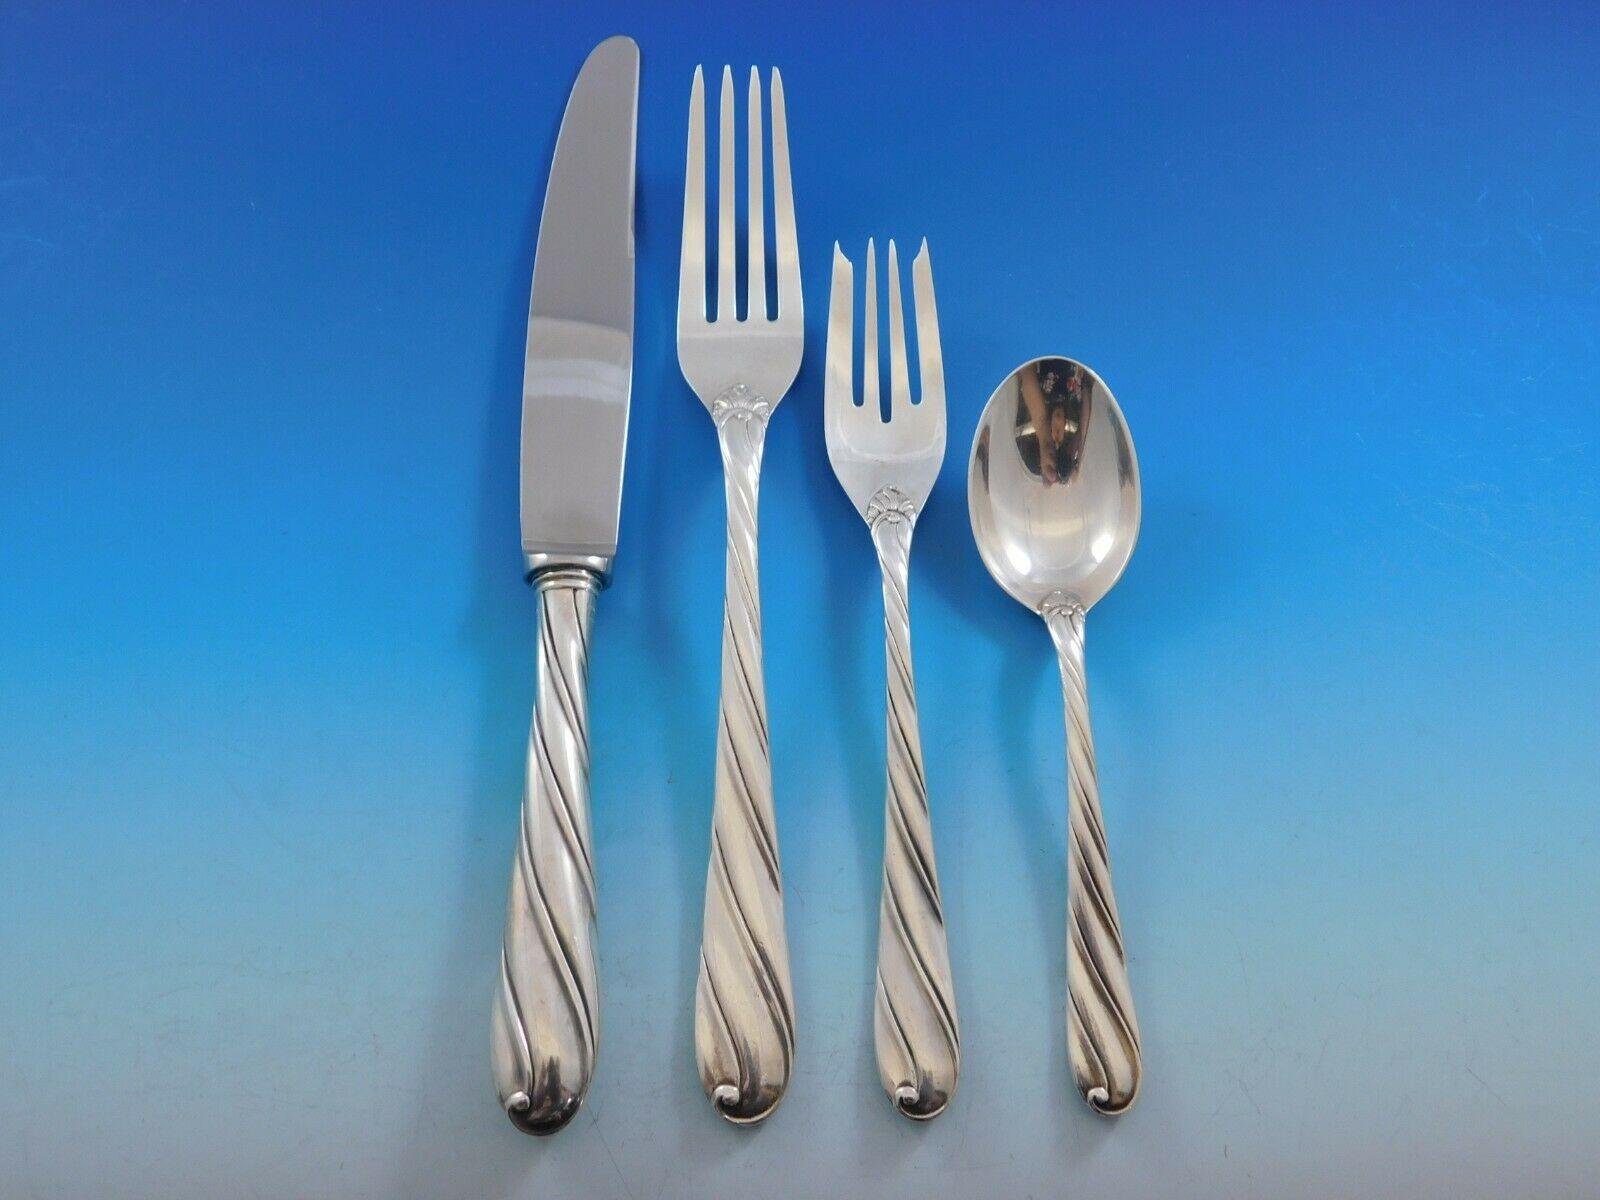 Exceptional dinner size torchon by Buccellati sterling silver flatware set - 36 pieces. Great starter set! This set includes:

6 dinner knives, serrated, 9 3/4